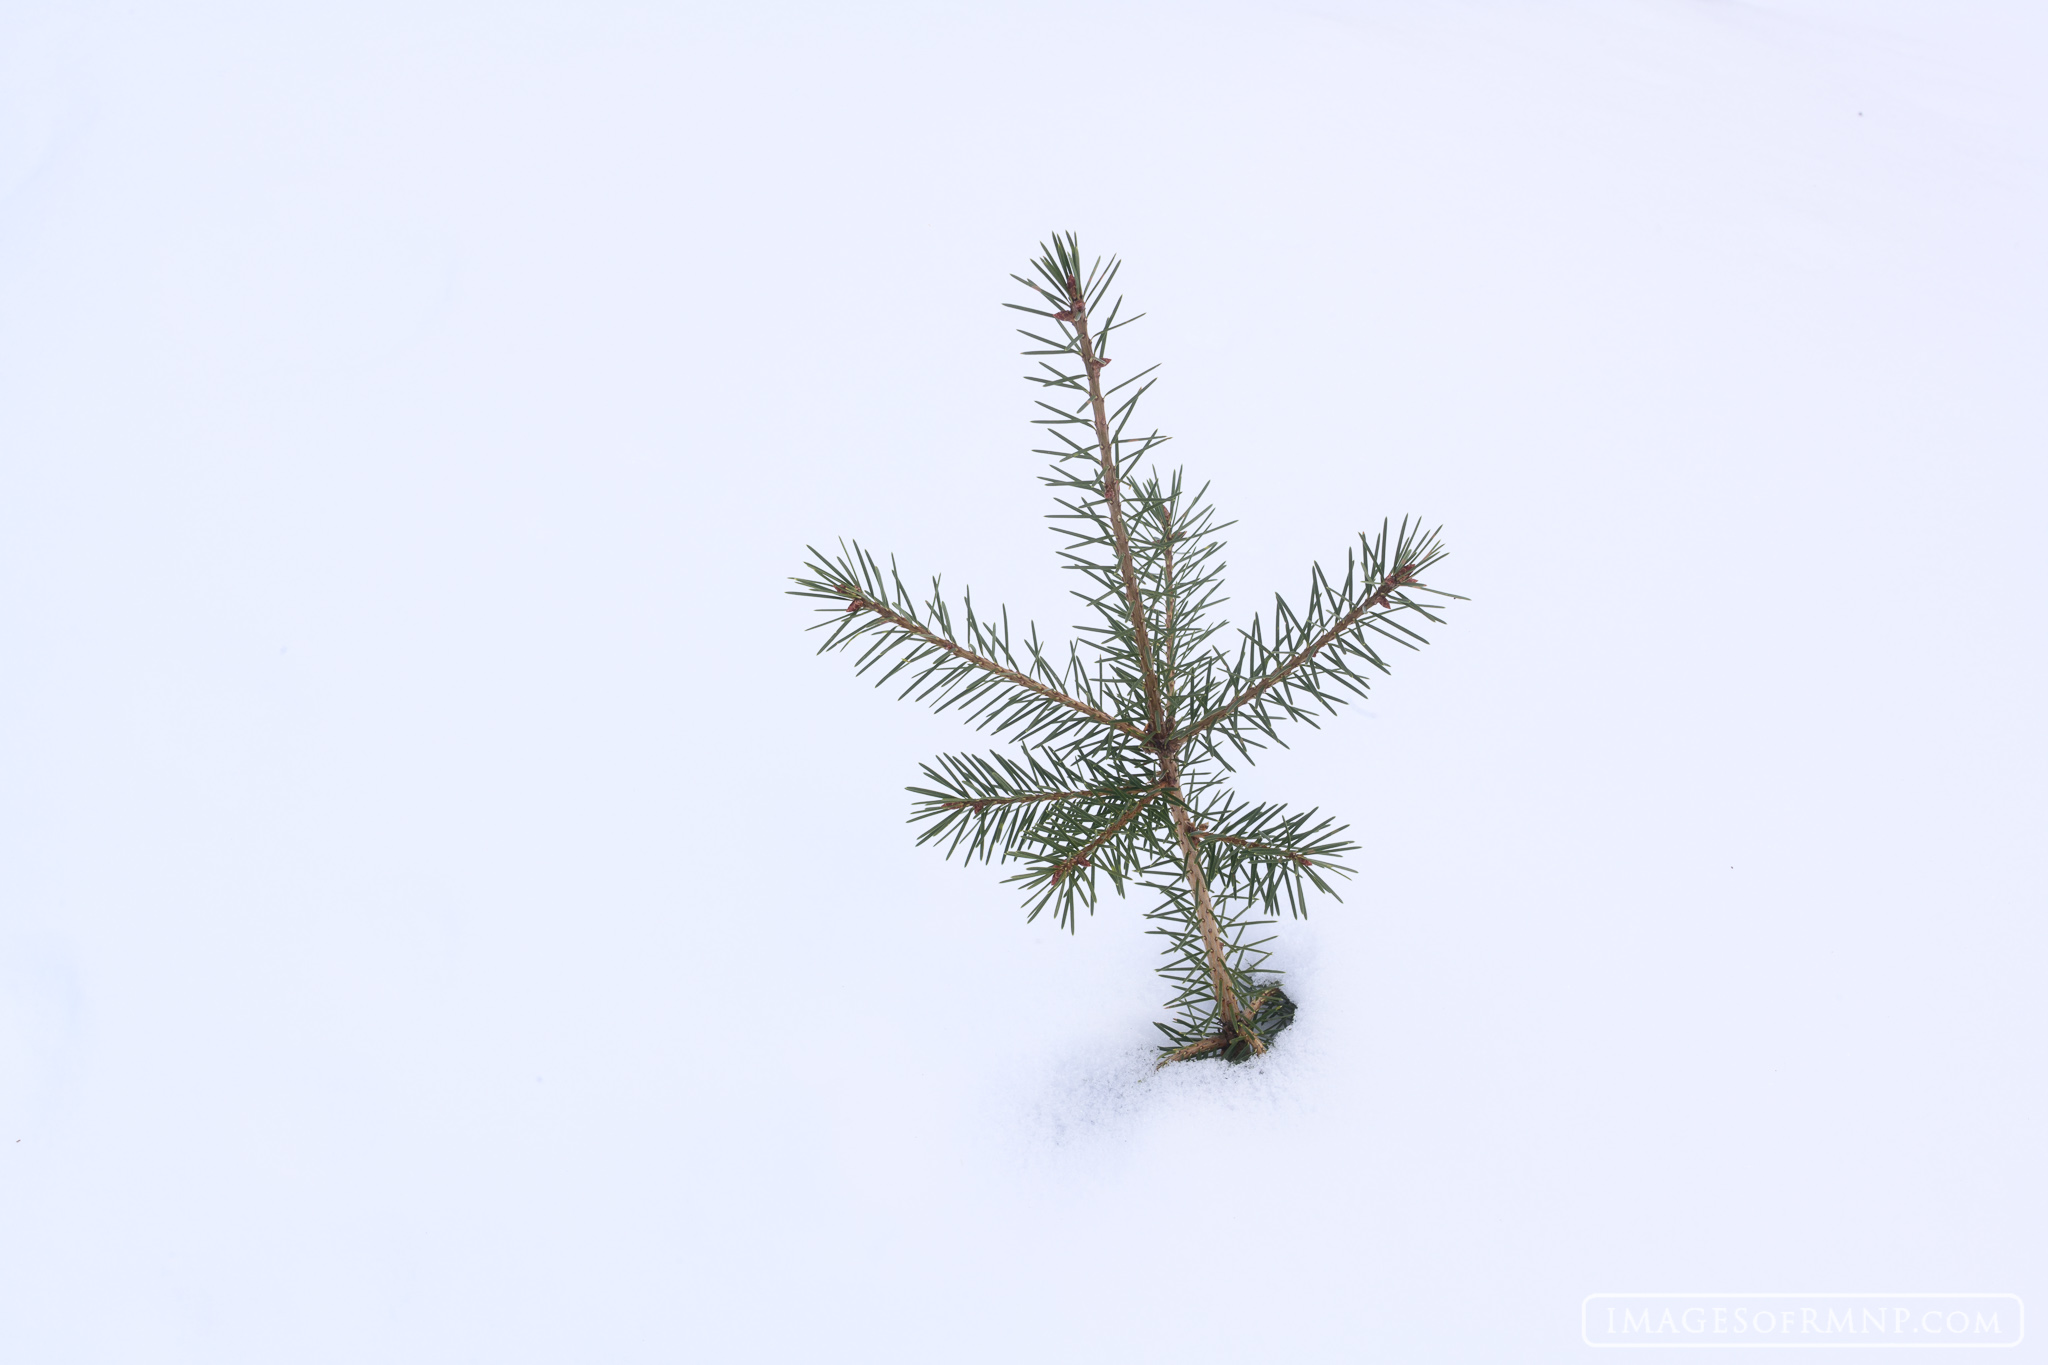 A young pine breaks through the darkness of the white snow and into the light of day. Here it stands alone, unaware that the...